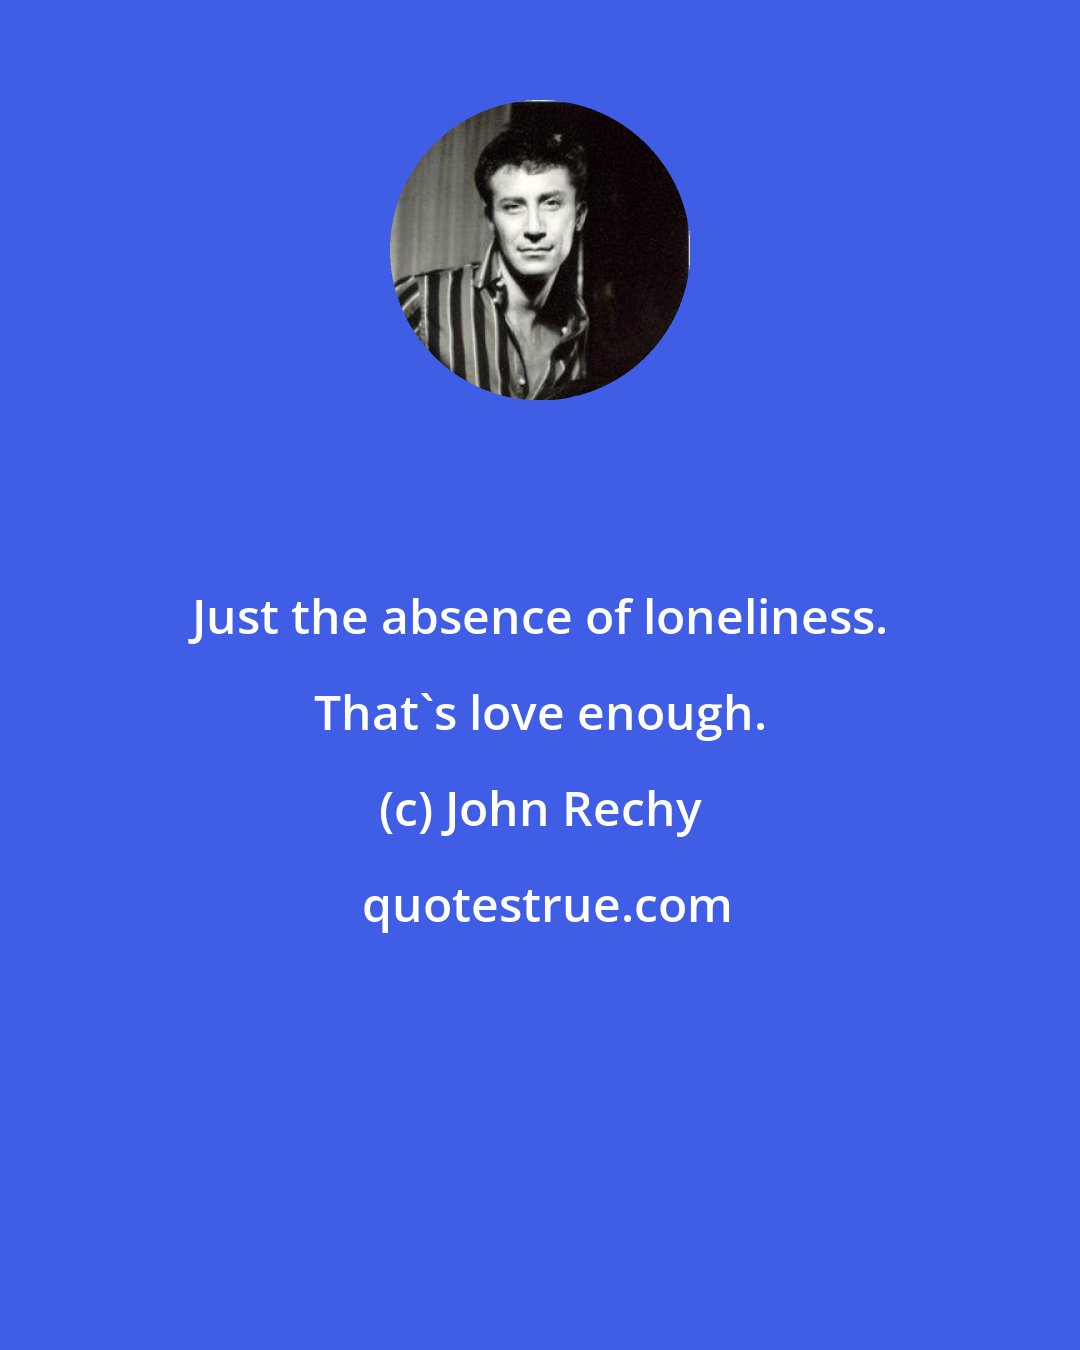 John Rechy: Just the absence of loneliness. That's love enough.